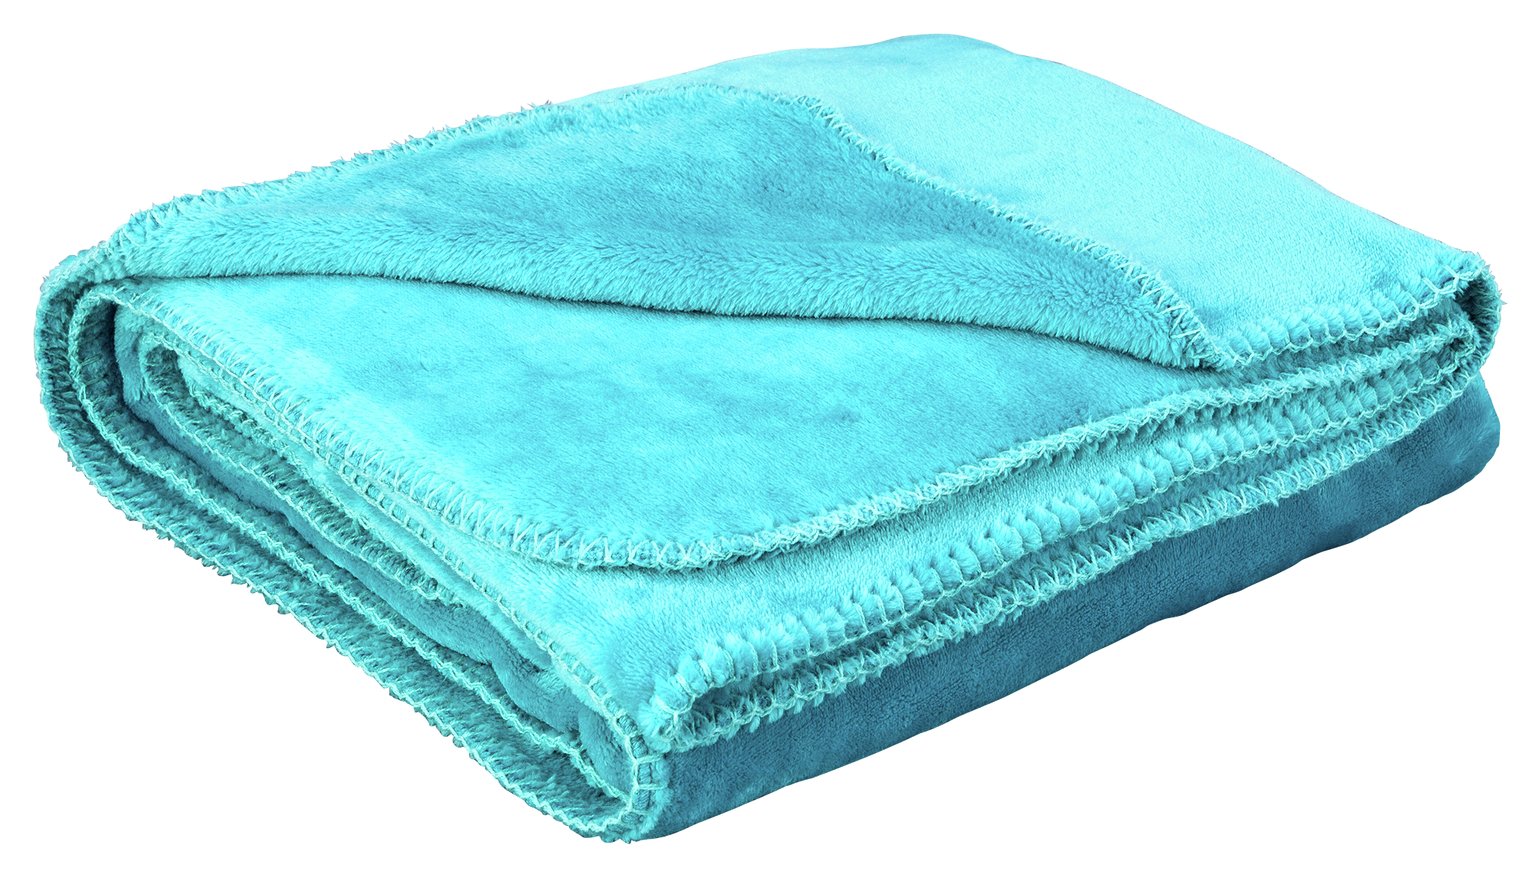 Argos Home Supersoft Throw - Teal